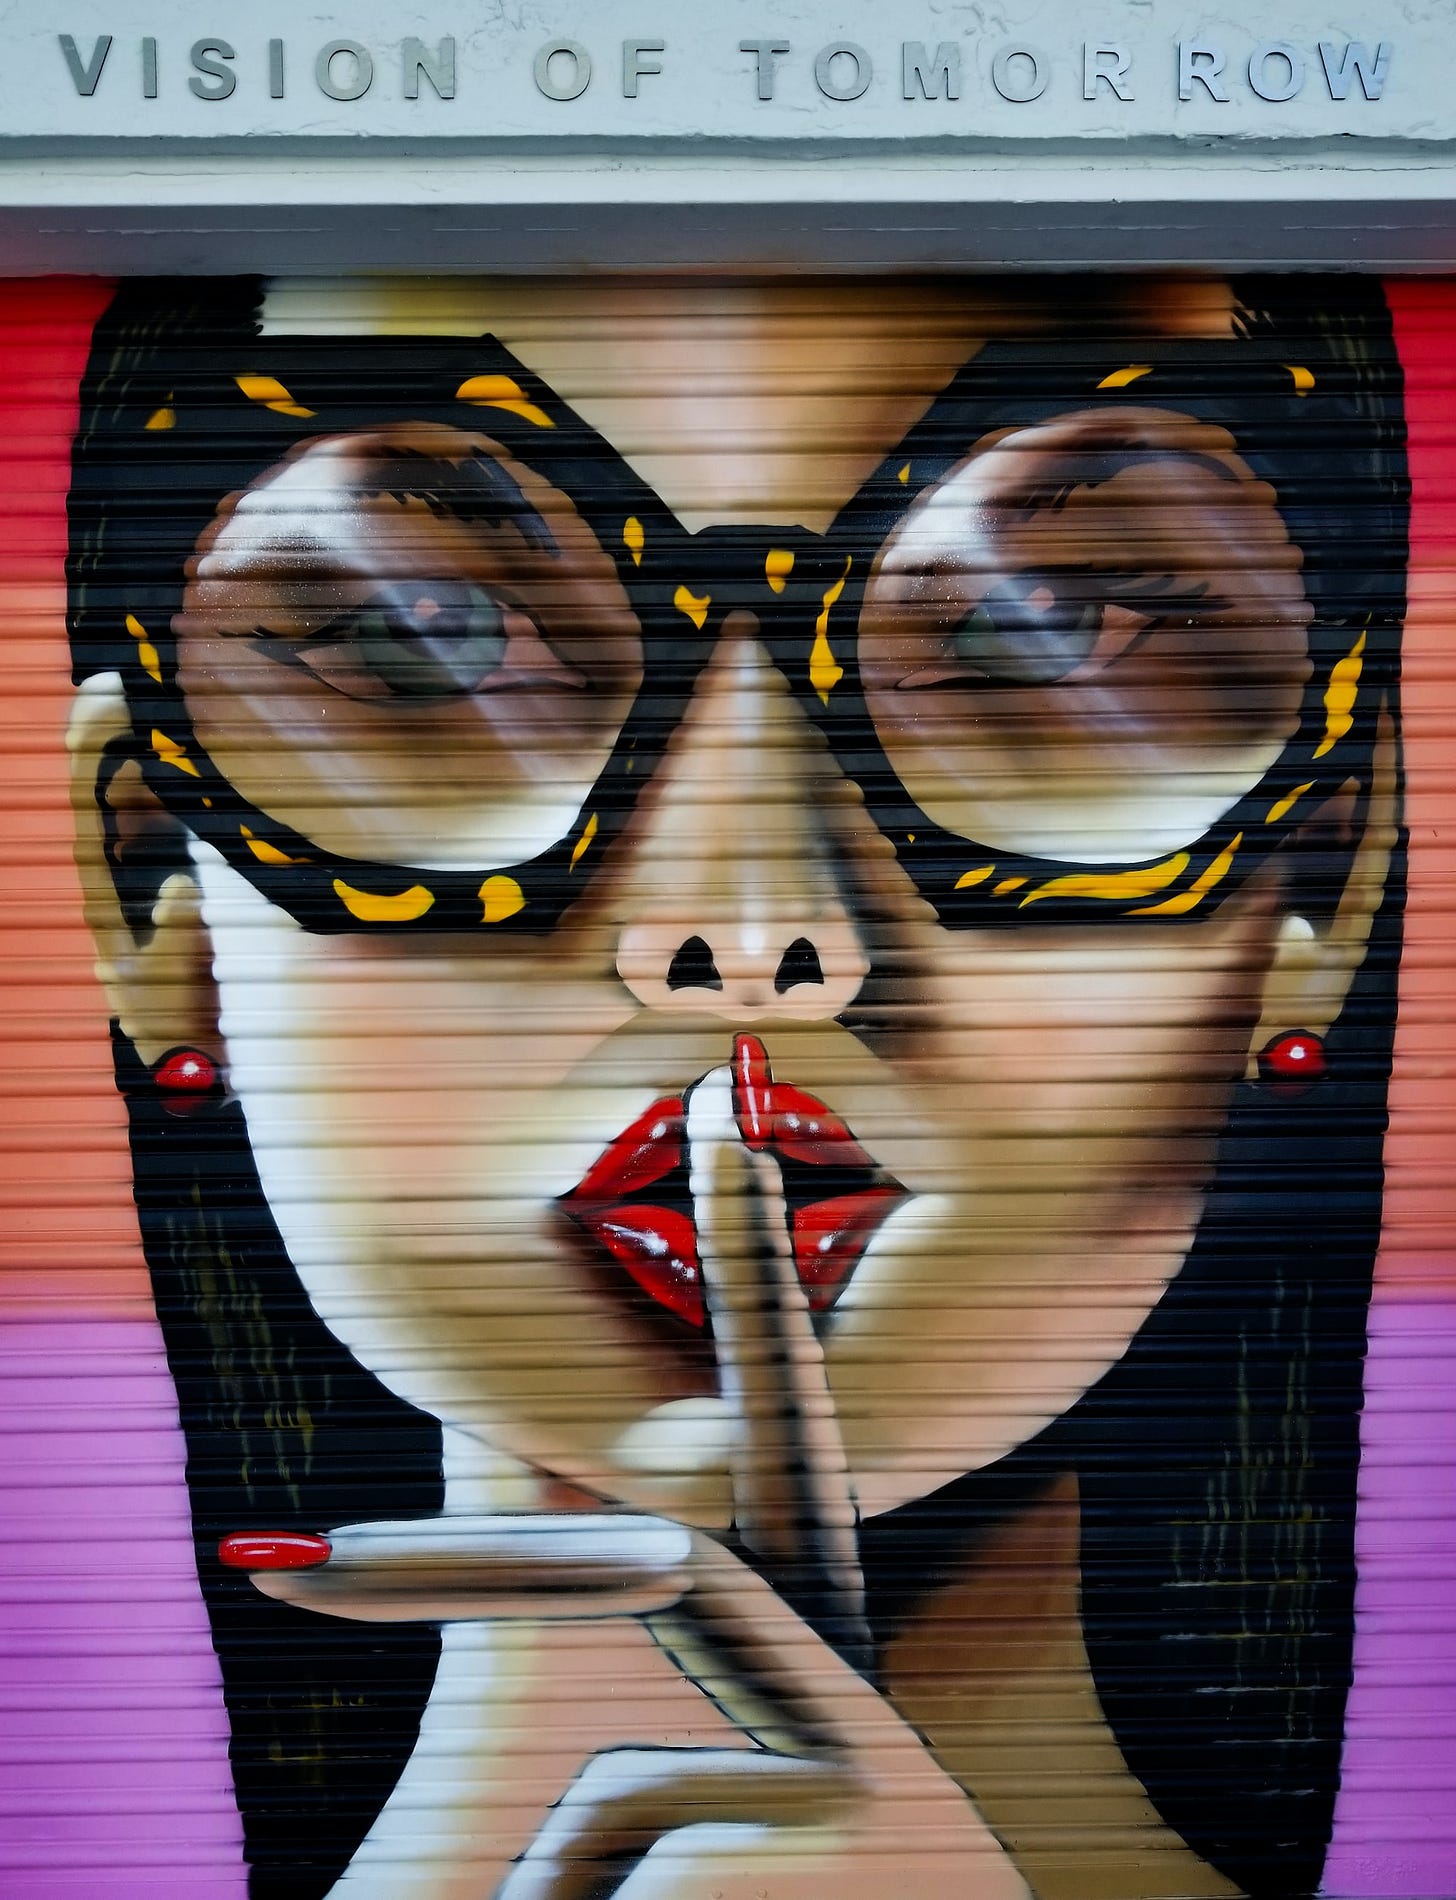 A vision of Tomorrow Women doing the (Shhh...) finger to mouth graffiti 
Artist: Unknown